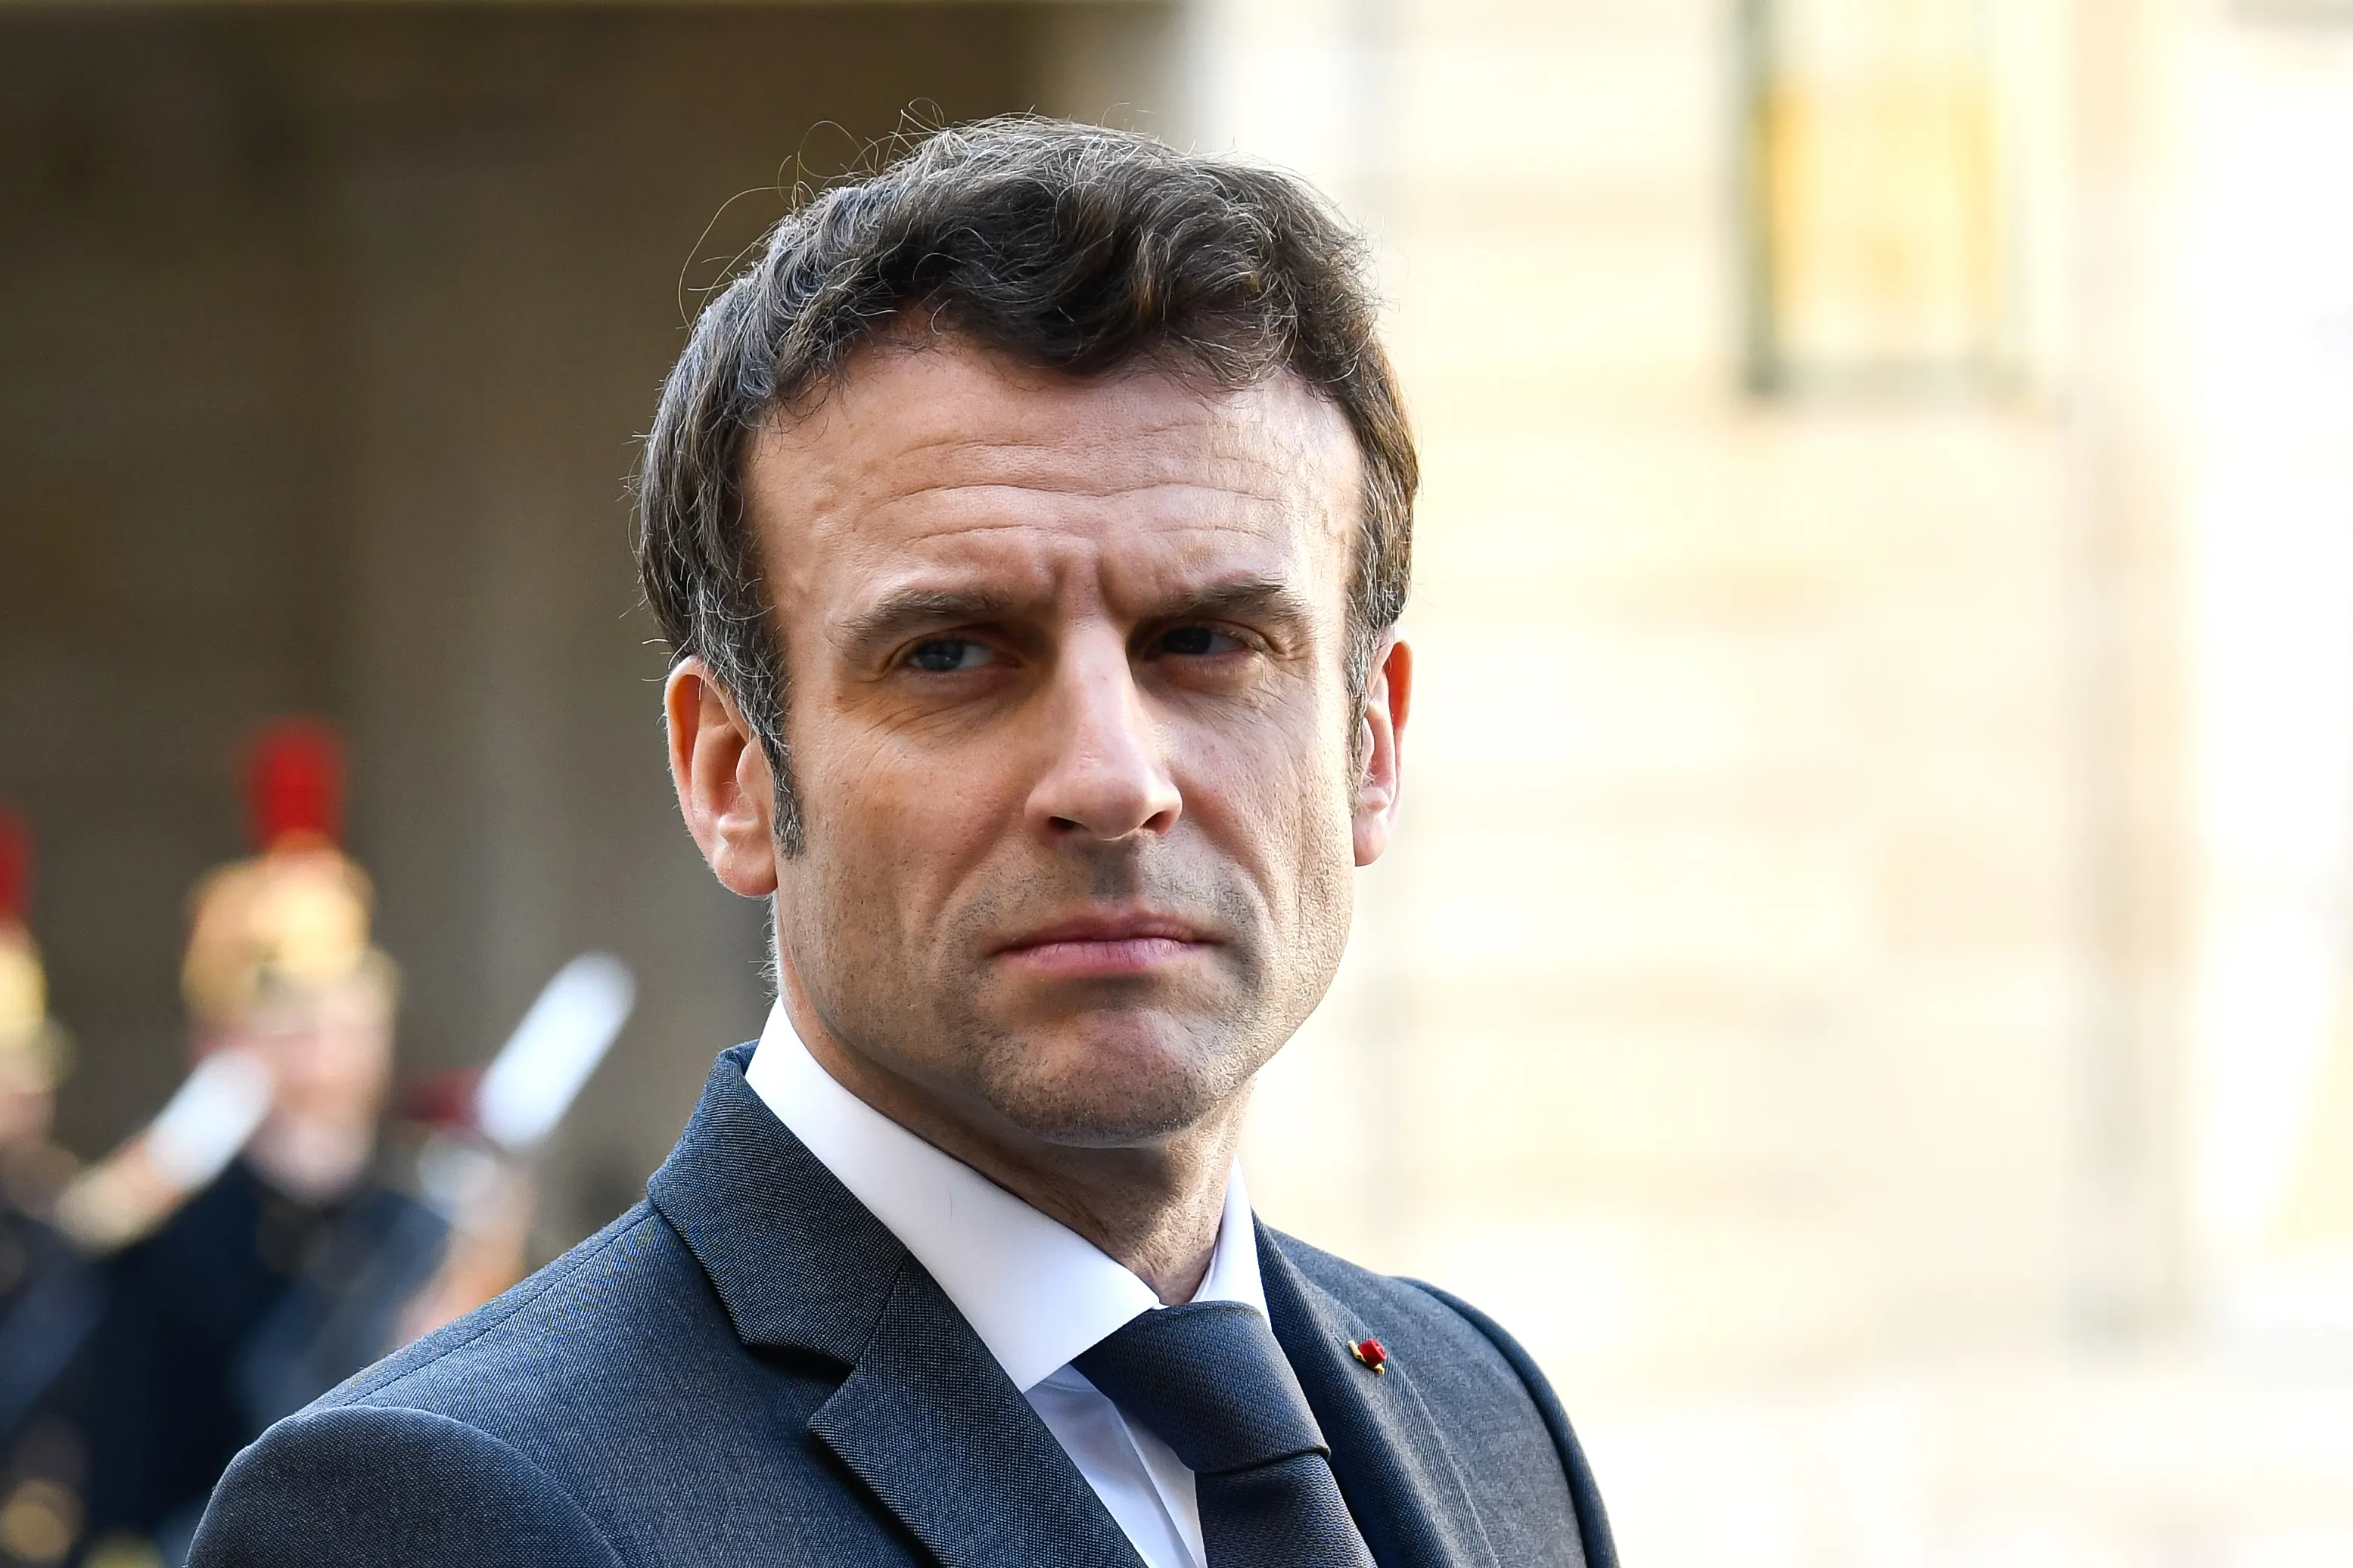 French President Emmanuel Macron during a meeting with Governor of Spain at the Elysee Presidential Palace in Paris on March 21, 2022.?w=200&h=150